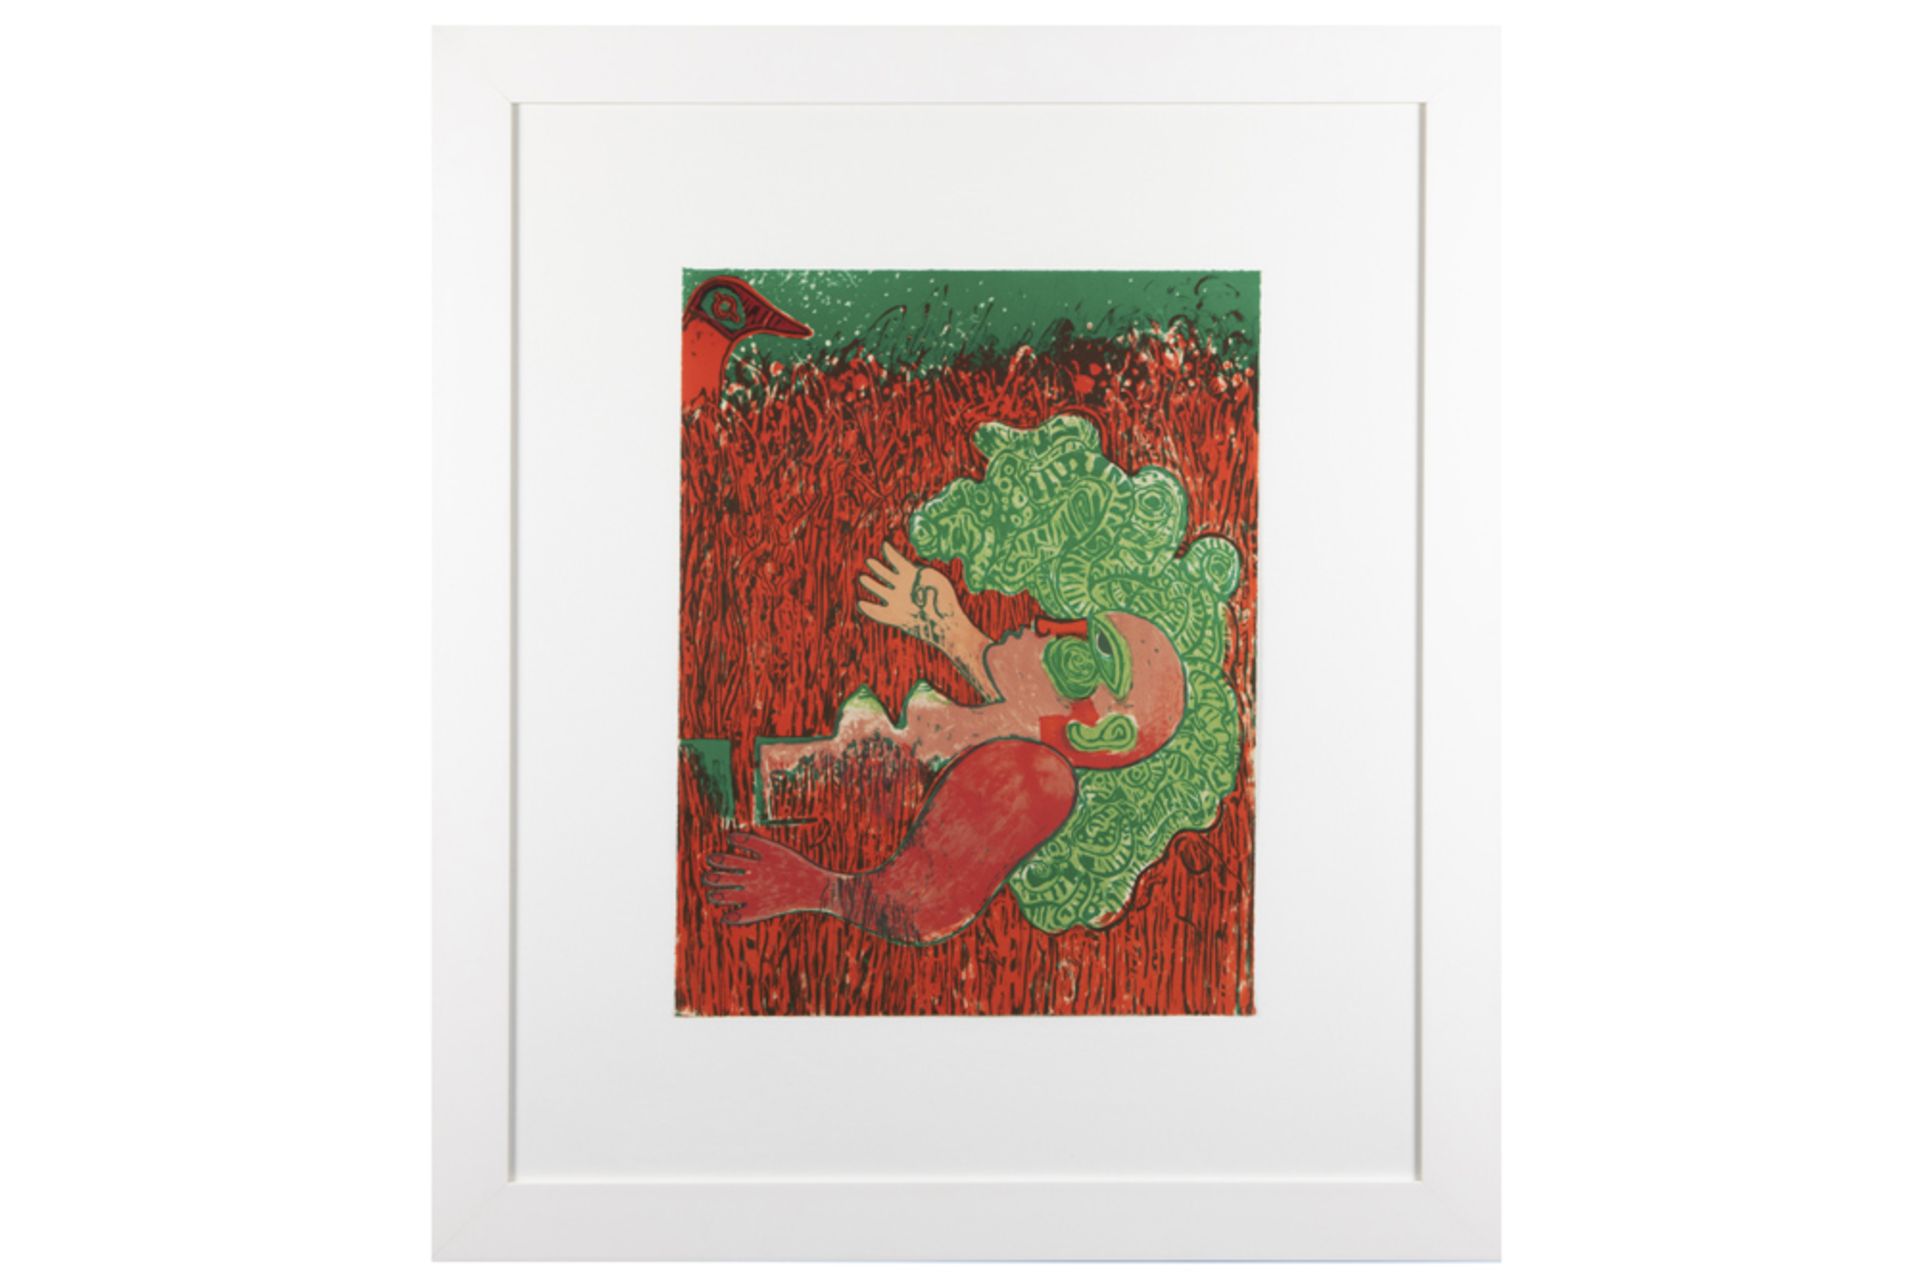 Corneille "Herbes II" lithograph printed in colours - with atelier stamp signed by Natacha van - Image 2 of 4